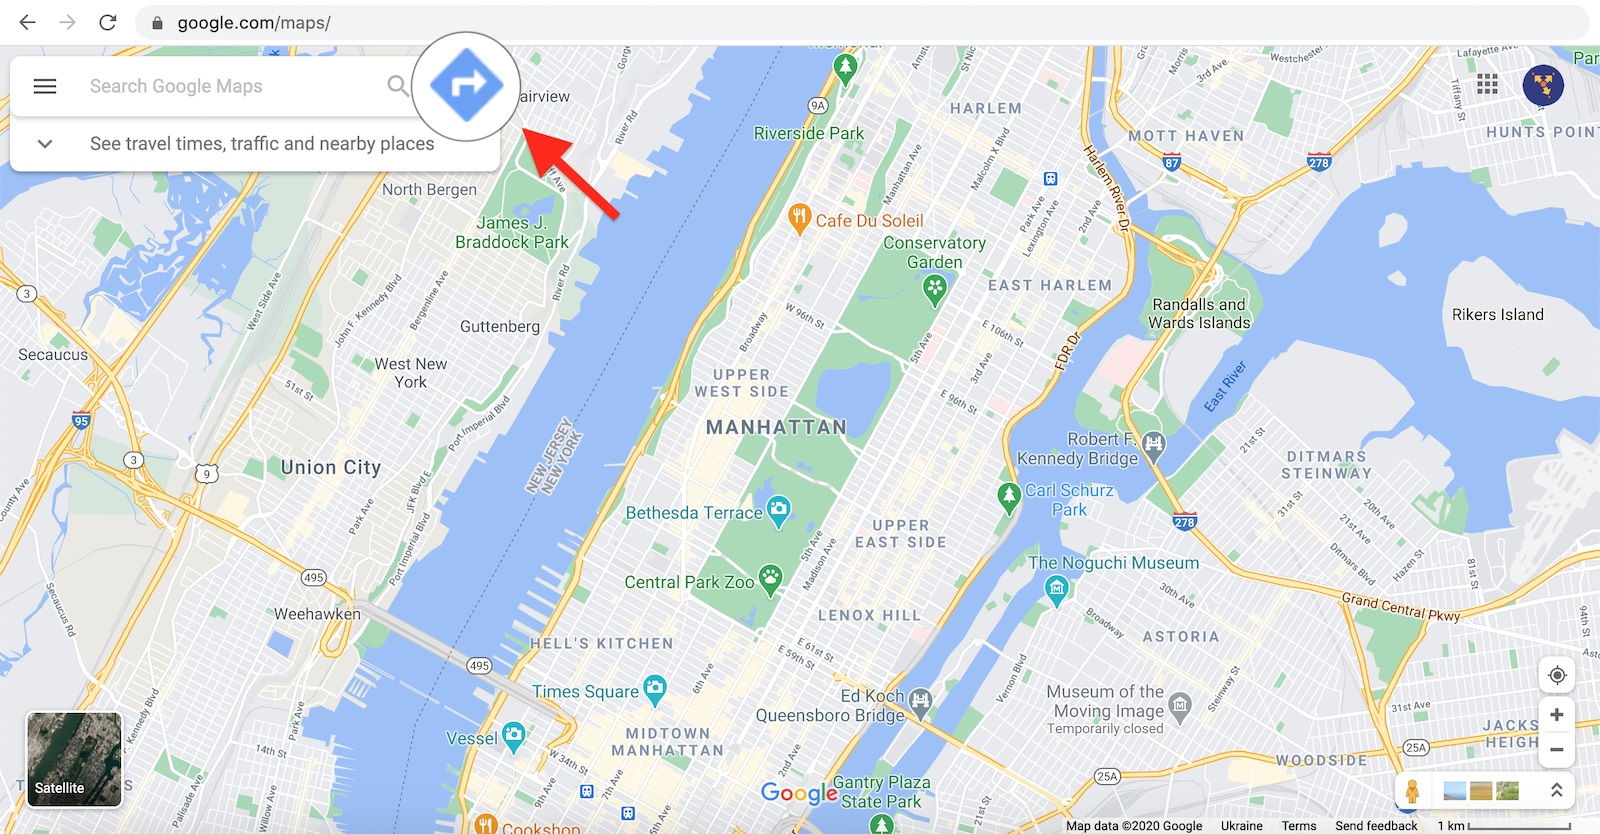 Getting directions on the Google Maps multiple stop route planner